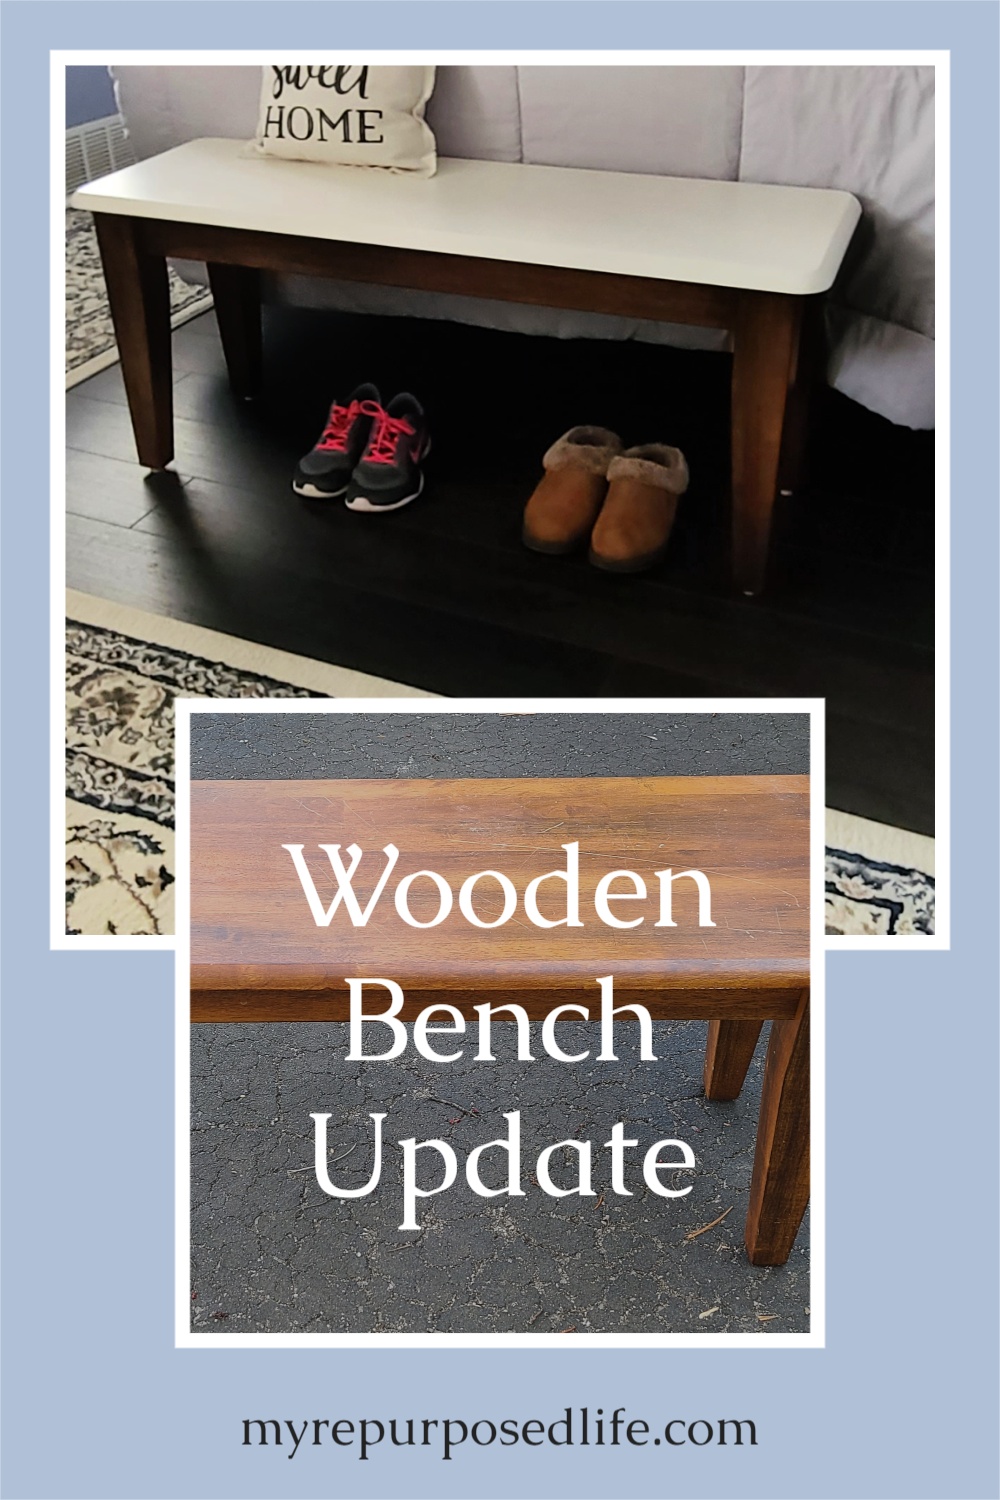 A wooden bench seat is great for so many uses and rooms. Perfect for end of the bed bench, dining table, or foyer. Easy makeover tutorial with paint and stain. #MyRepurposedLife #upcycle #benchseat #wooden #dining #endofbed via @repurposedlife